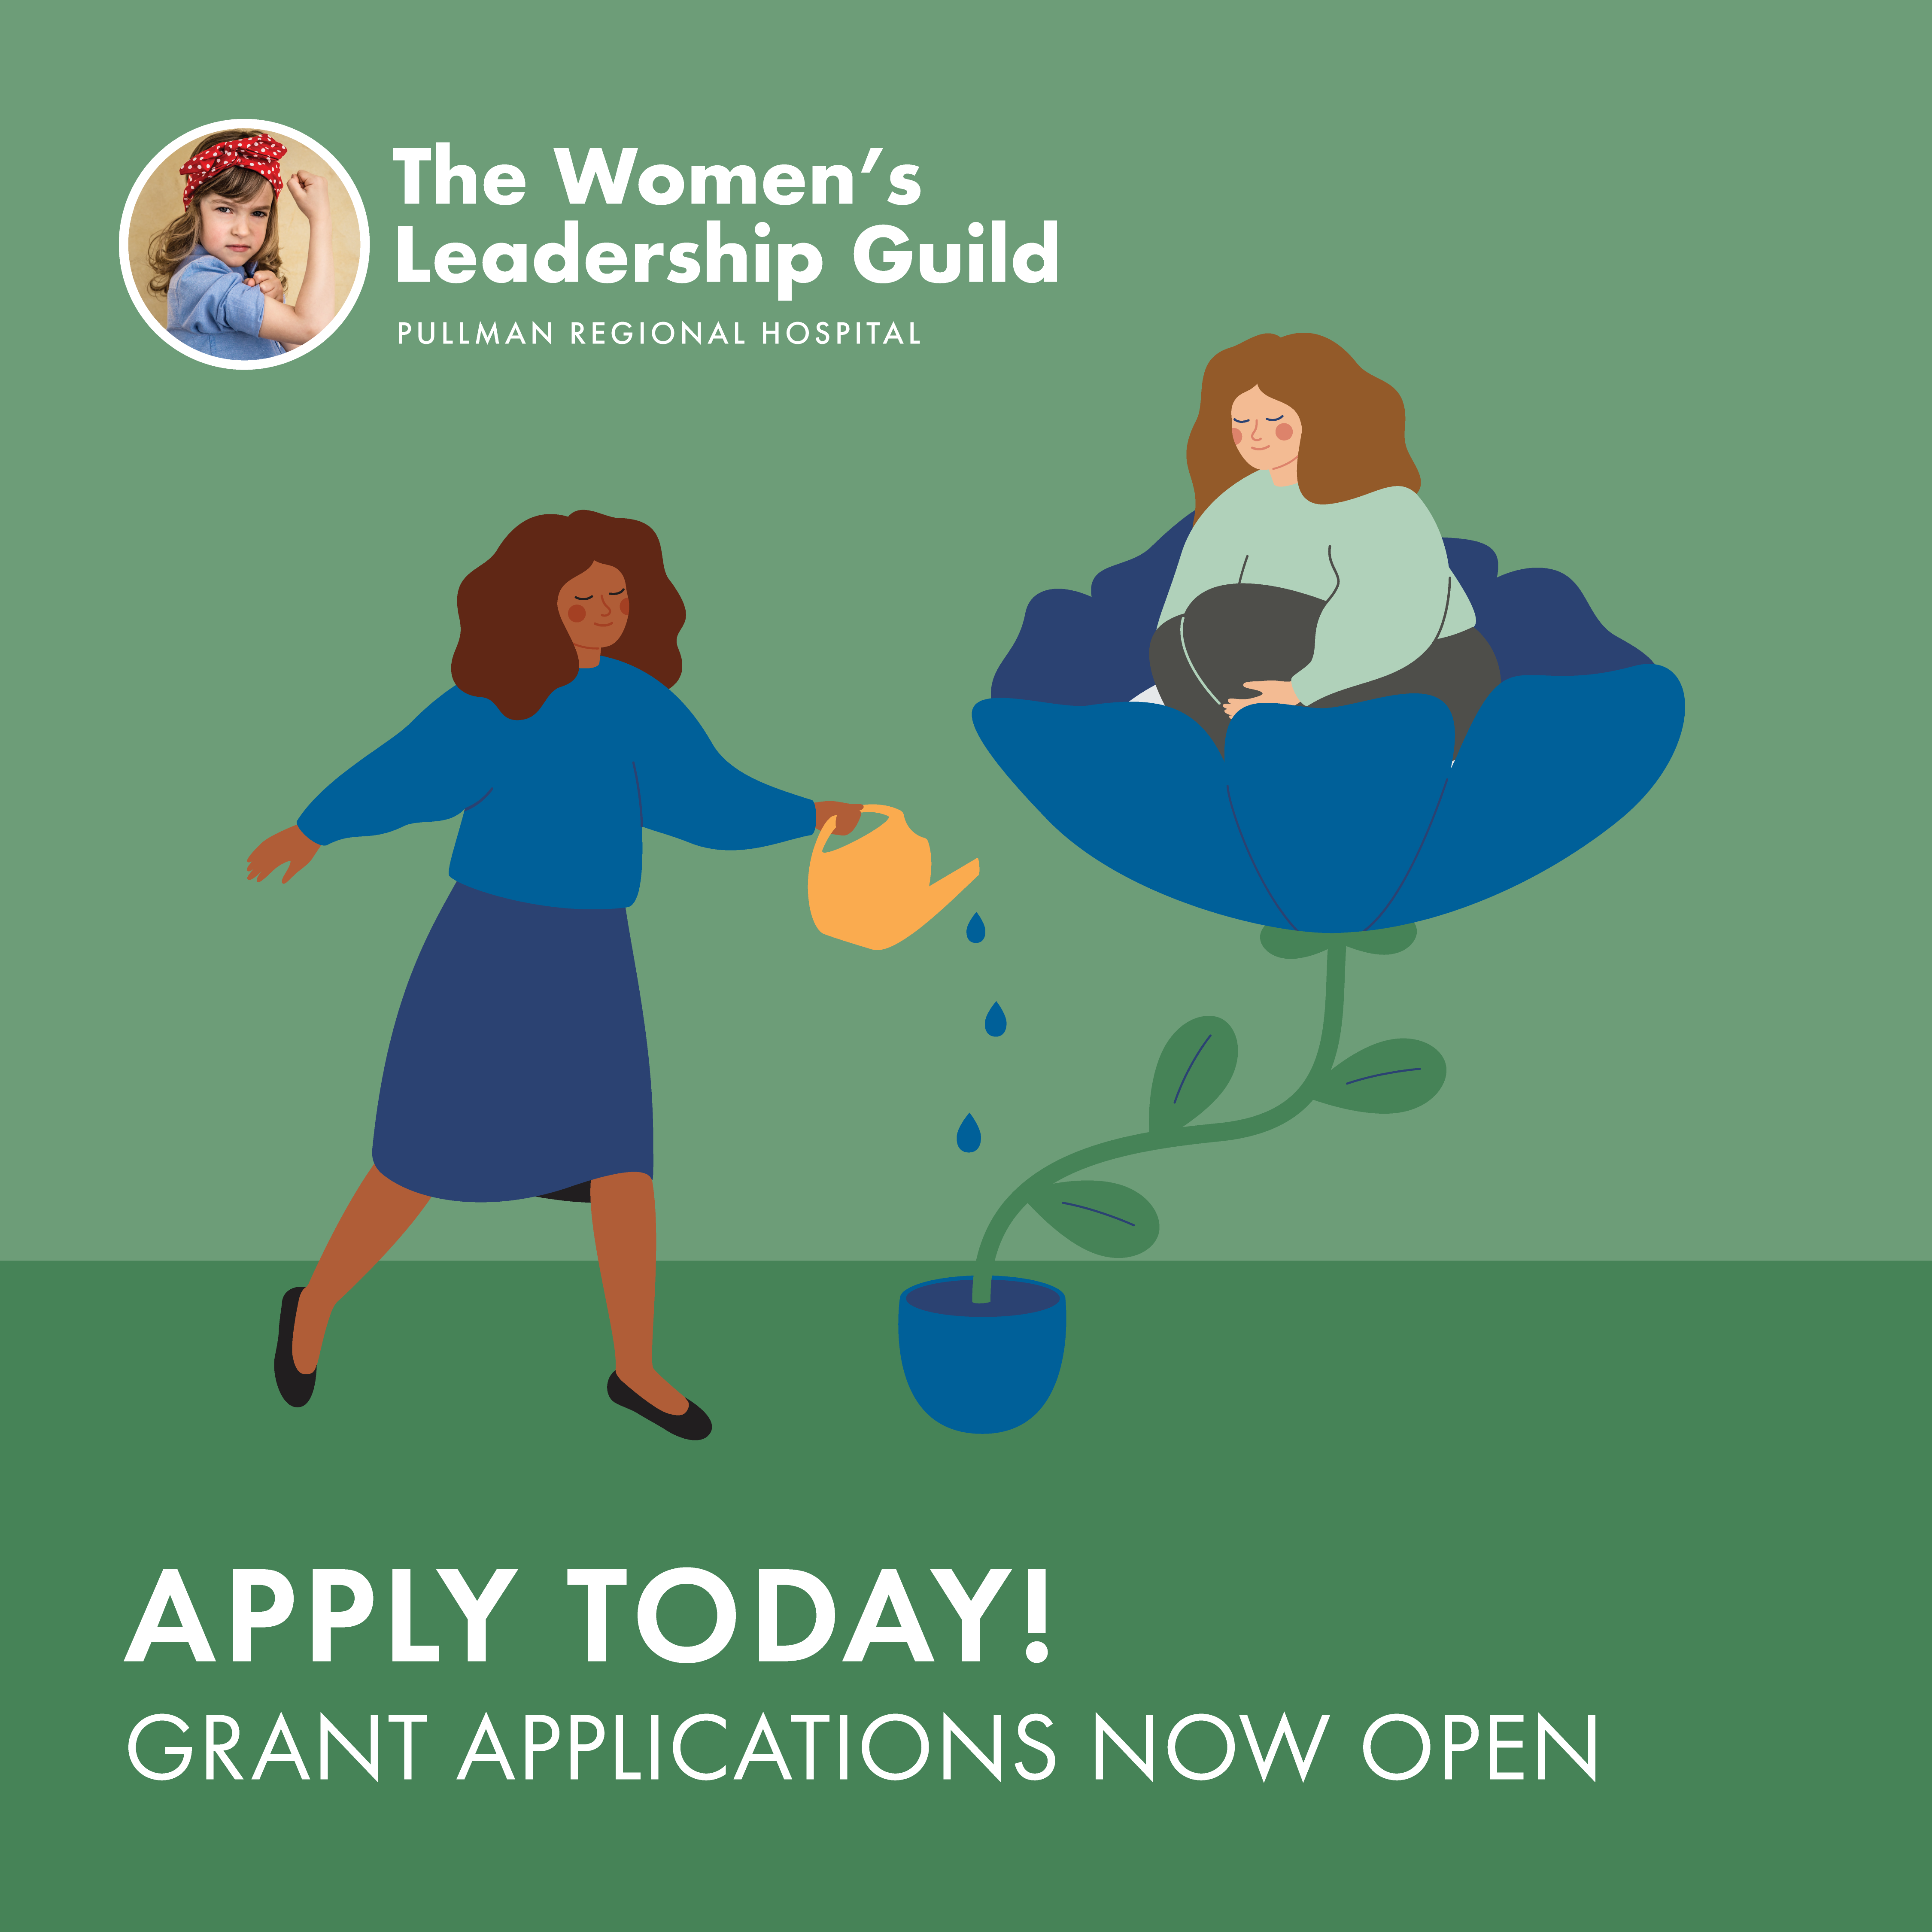 Women’s Leadership Guild Now Accepting Grant Applications for $2,000 Grant Awards